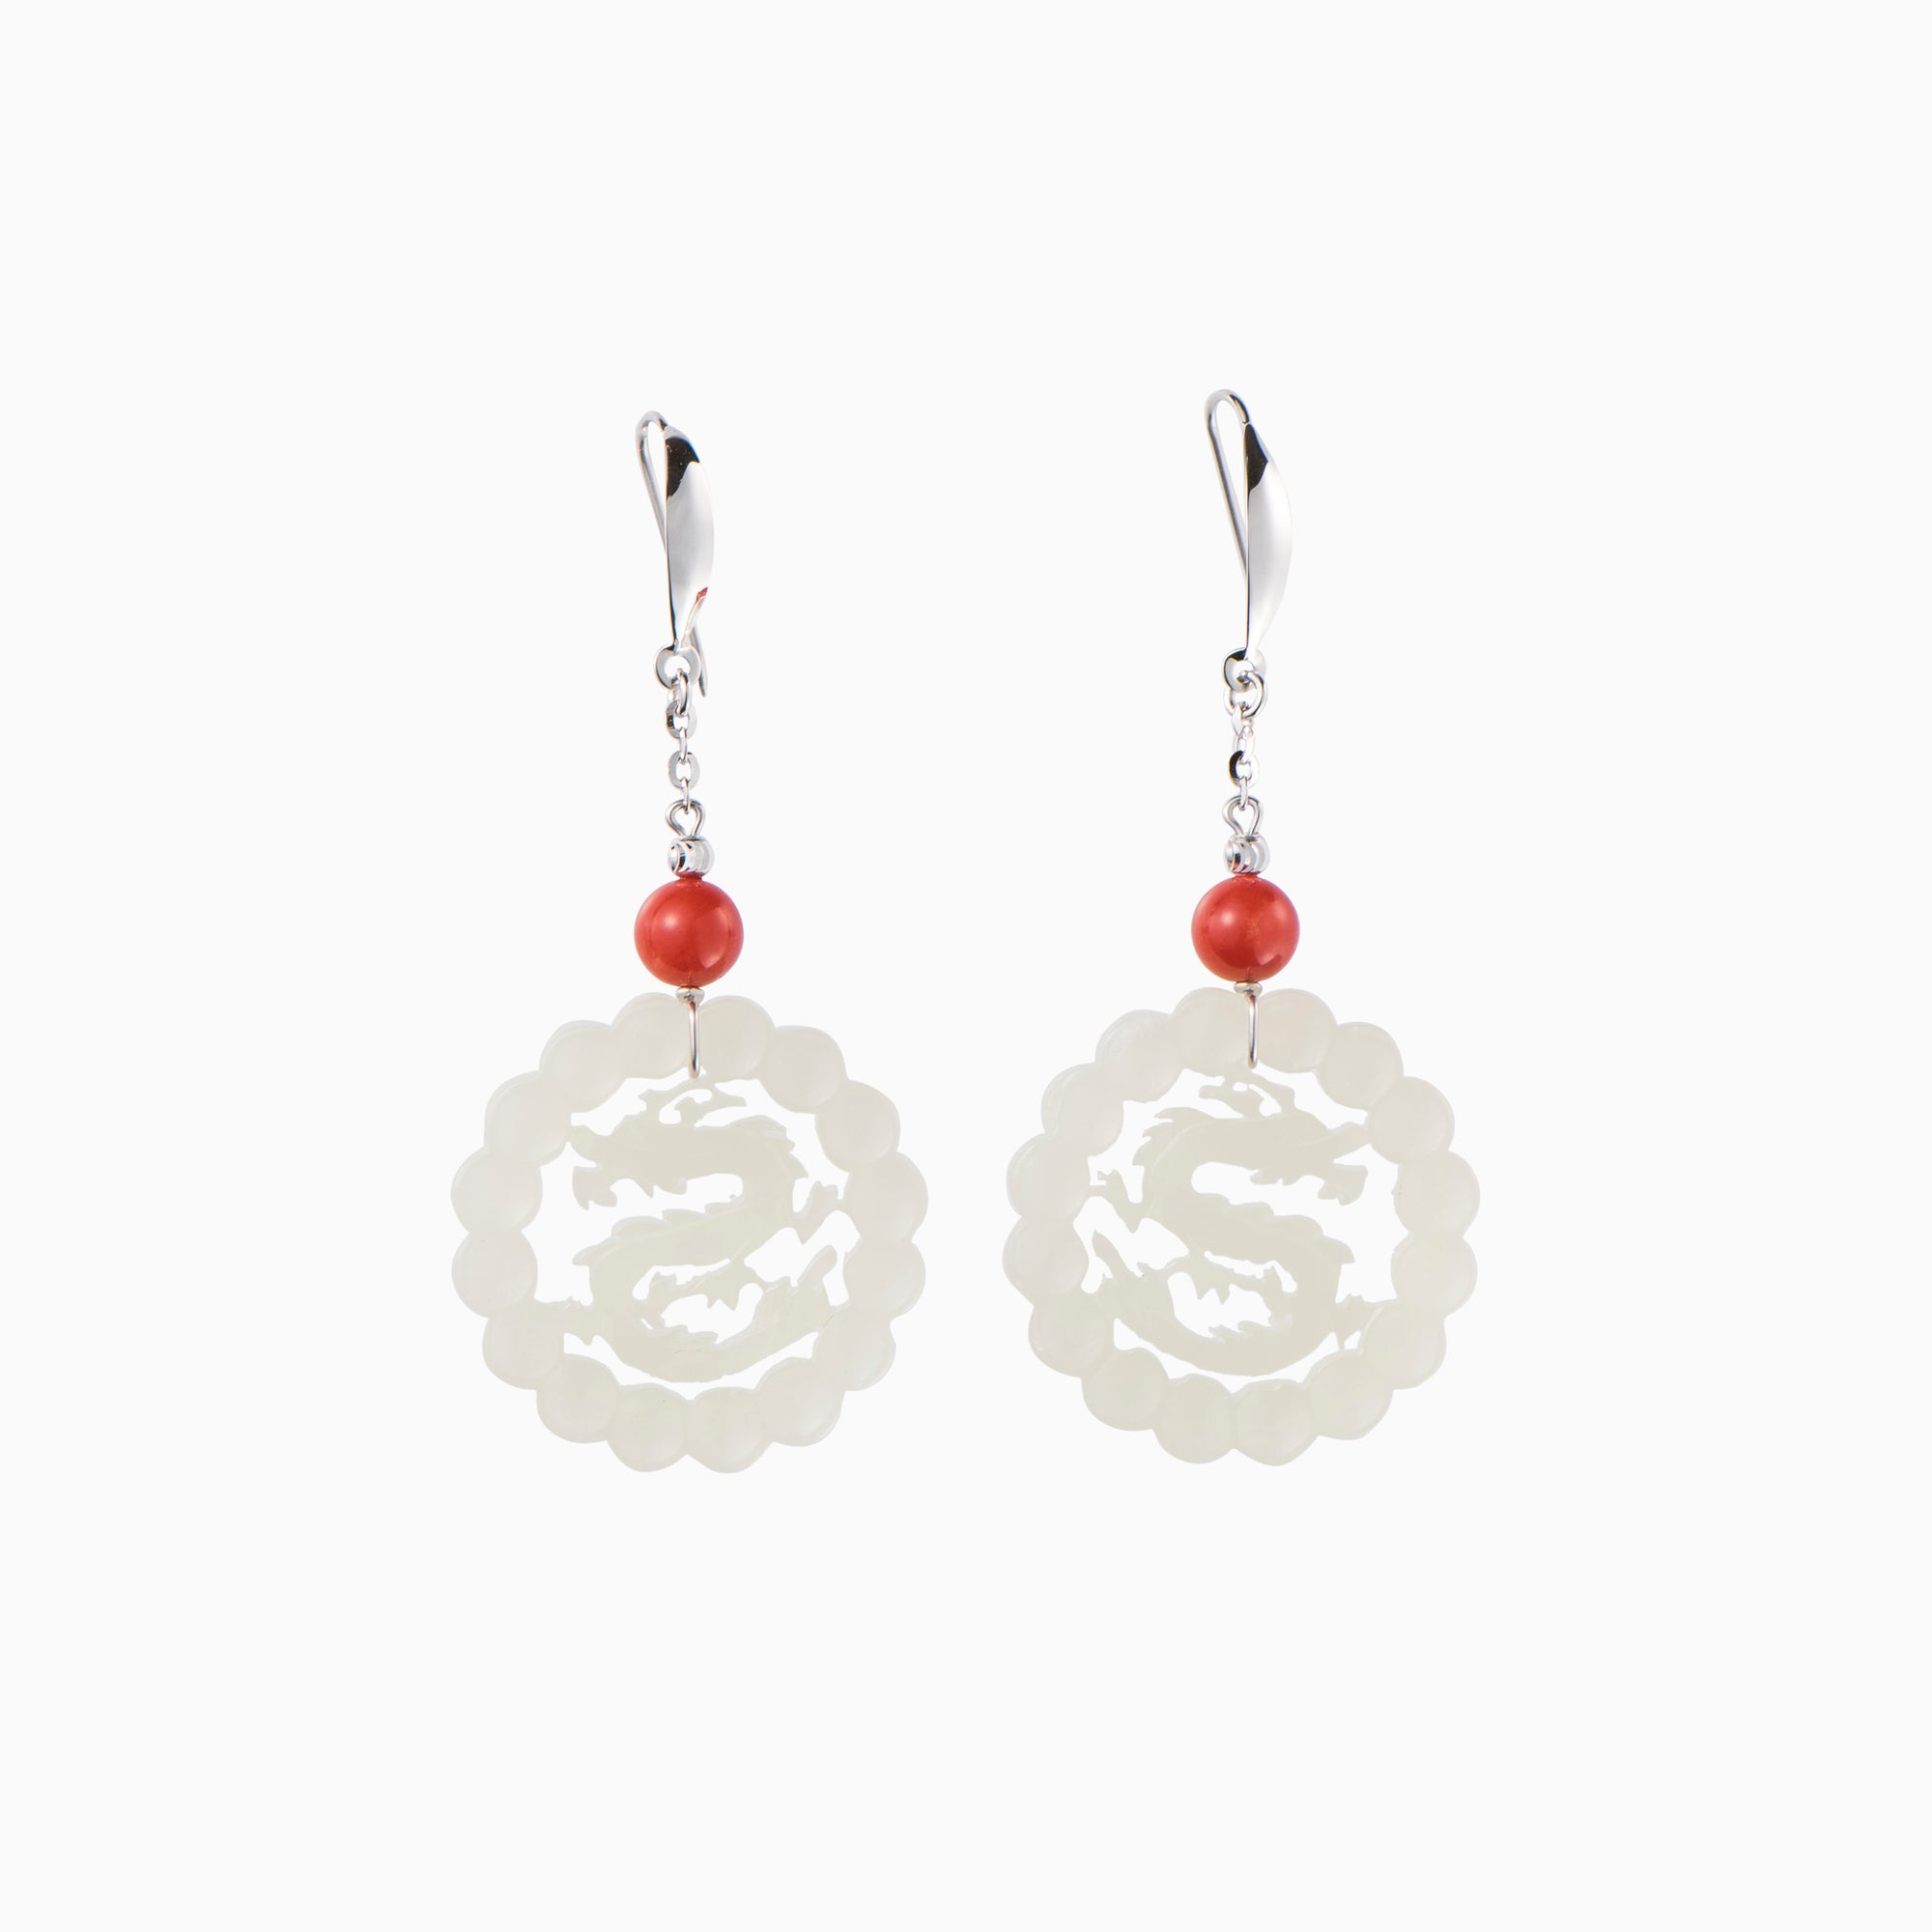 White jade dragon earrings with coral sphere